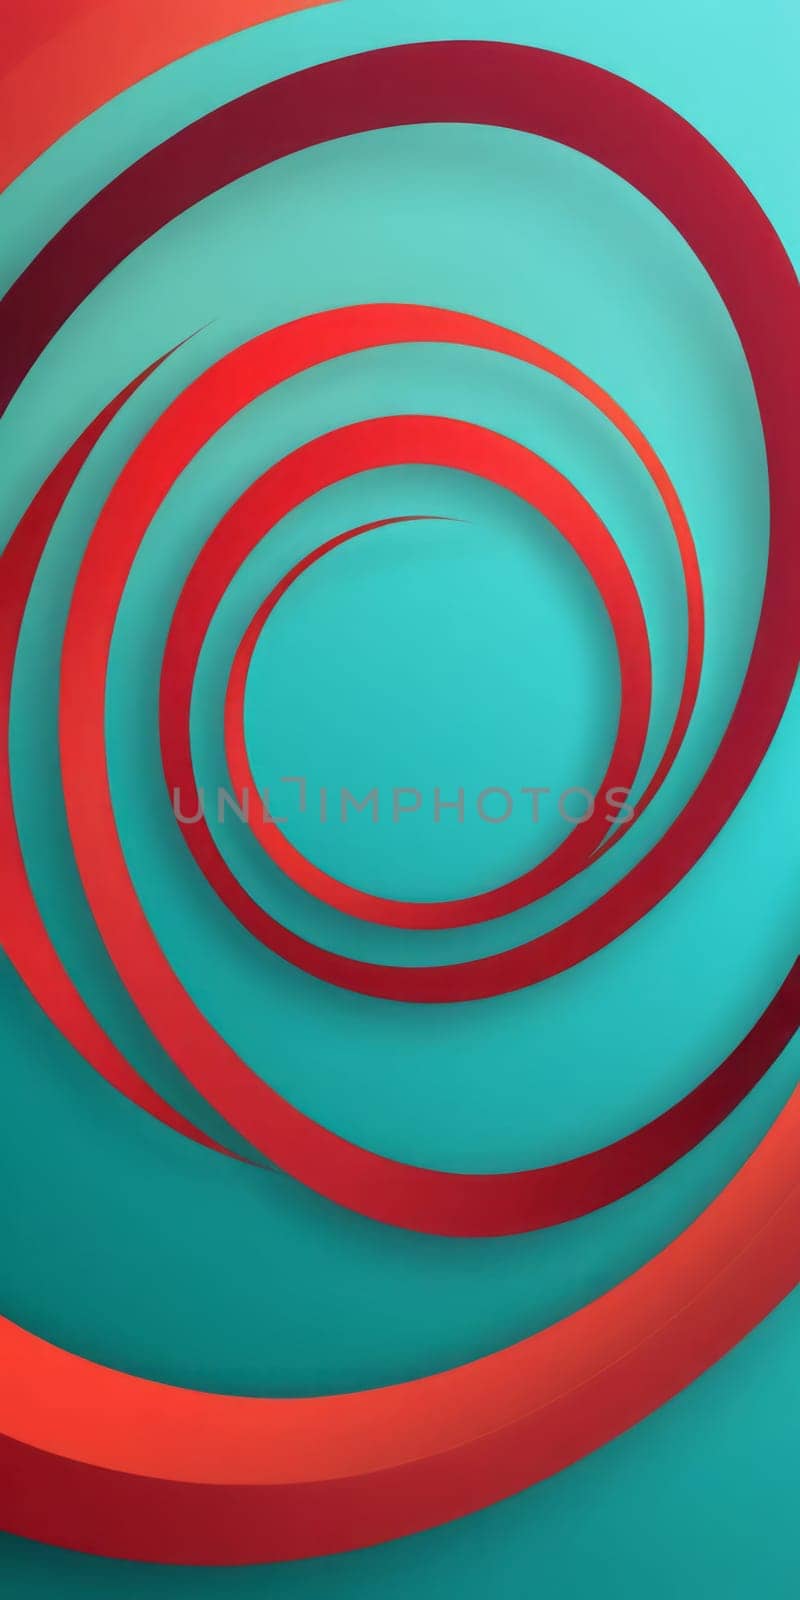 Annular Shapes in Aqua and Red by nkotlyar